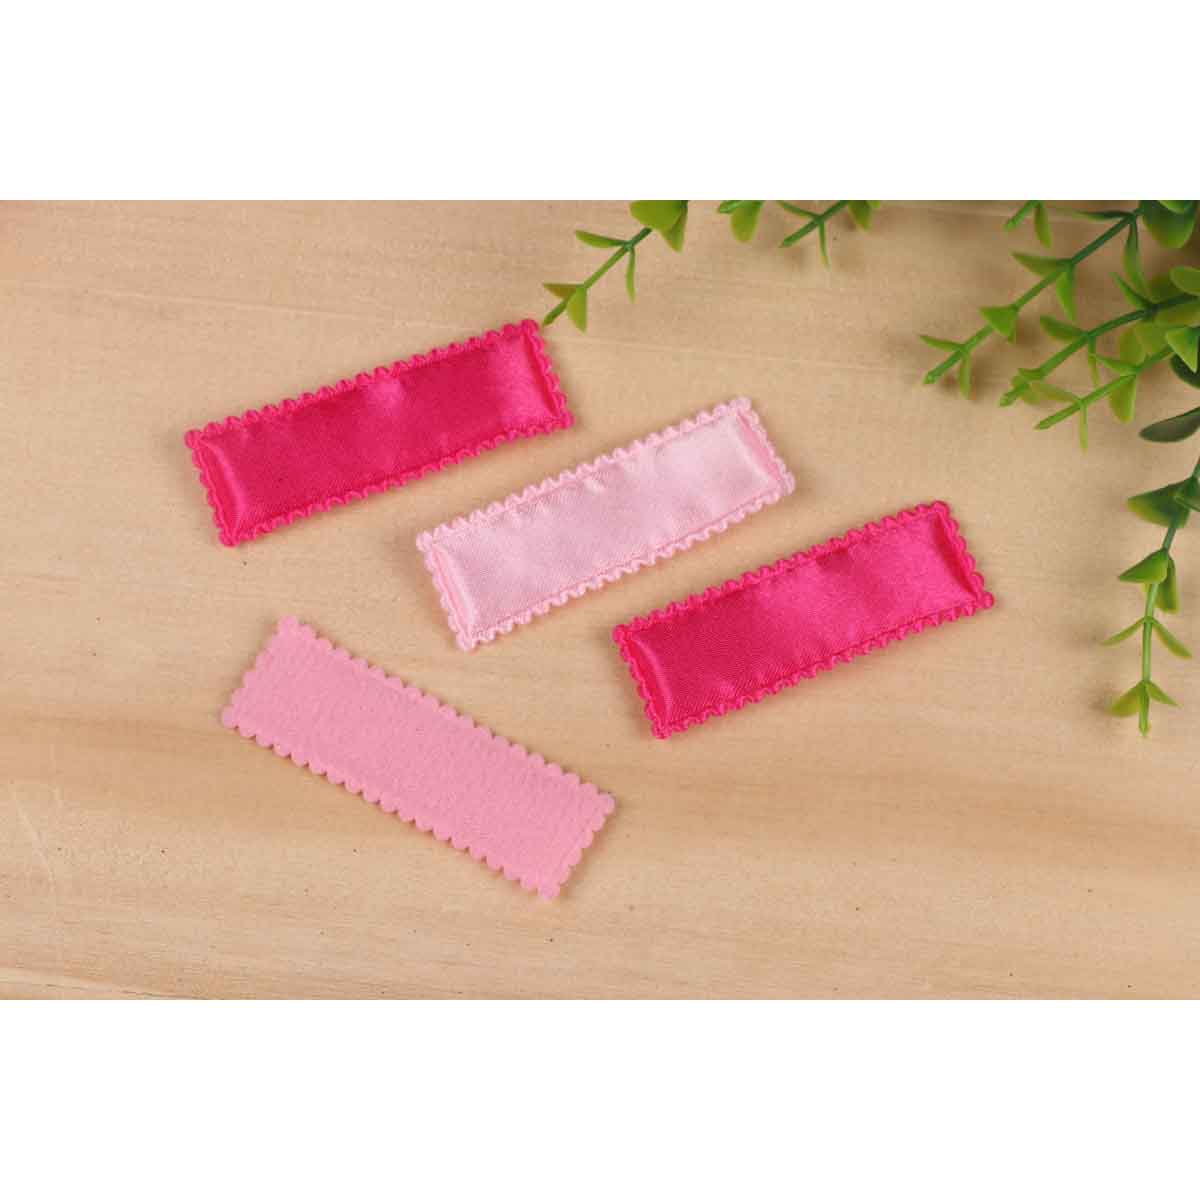 100 Padded Satin Hair Clip Covers 55mm-Hot Pink/Pink